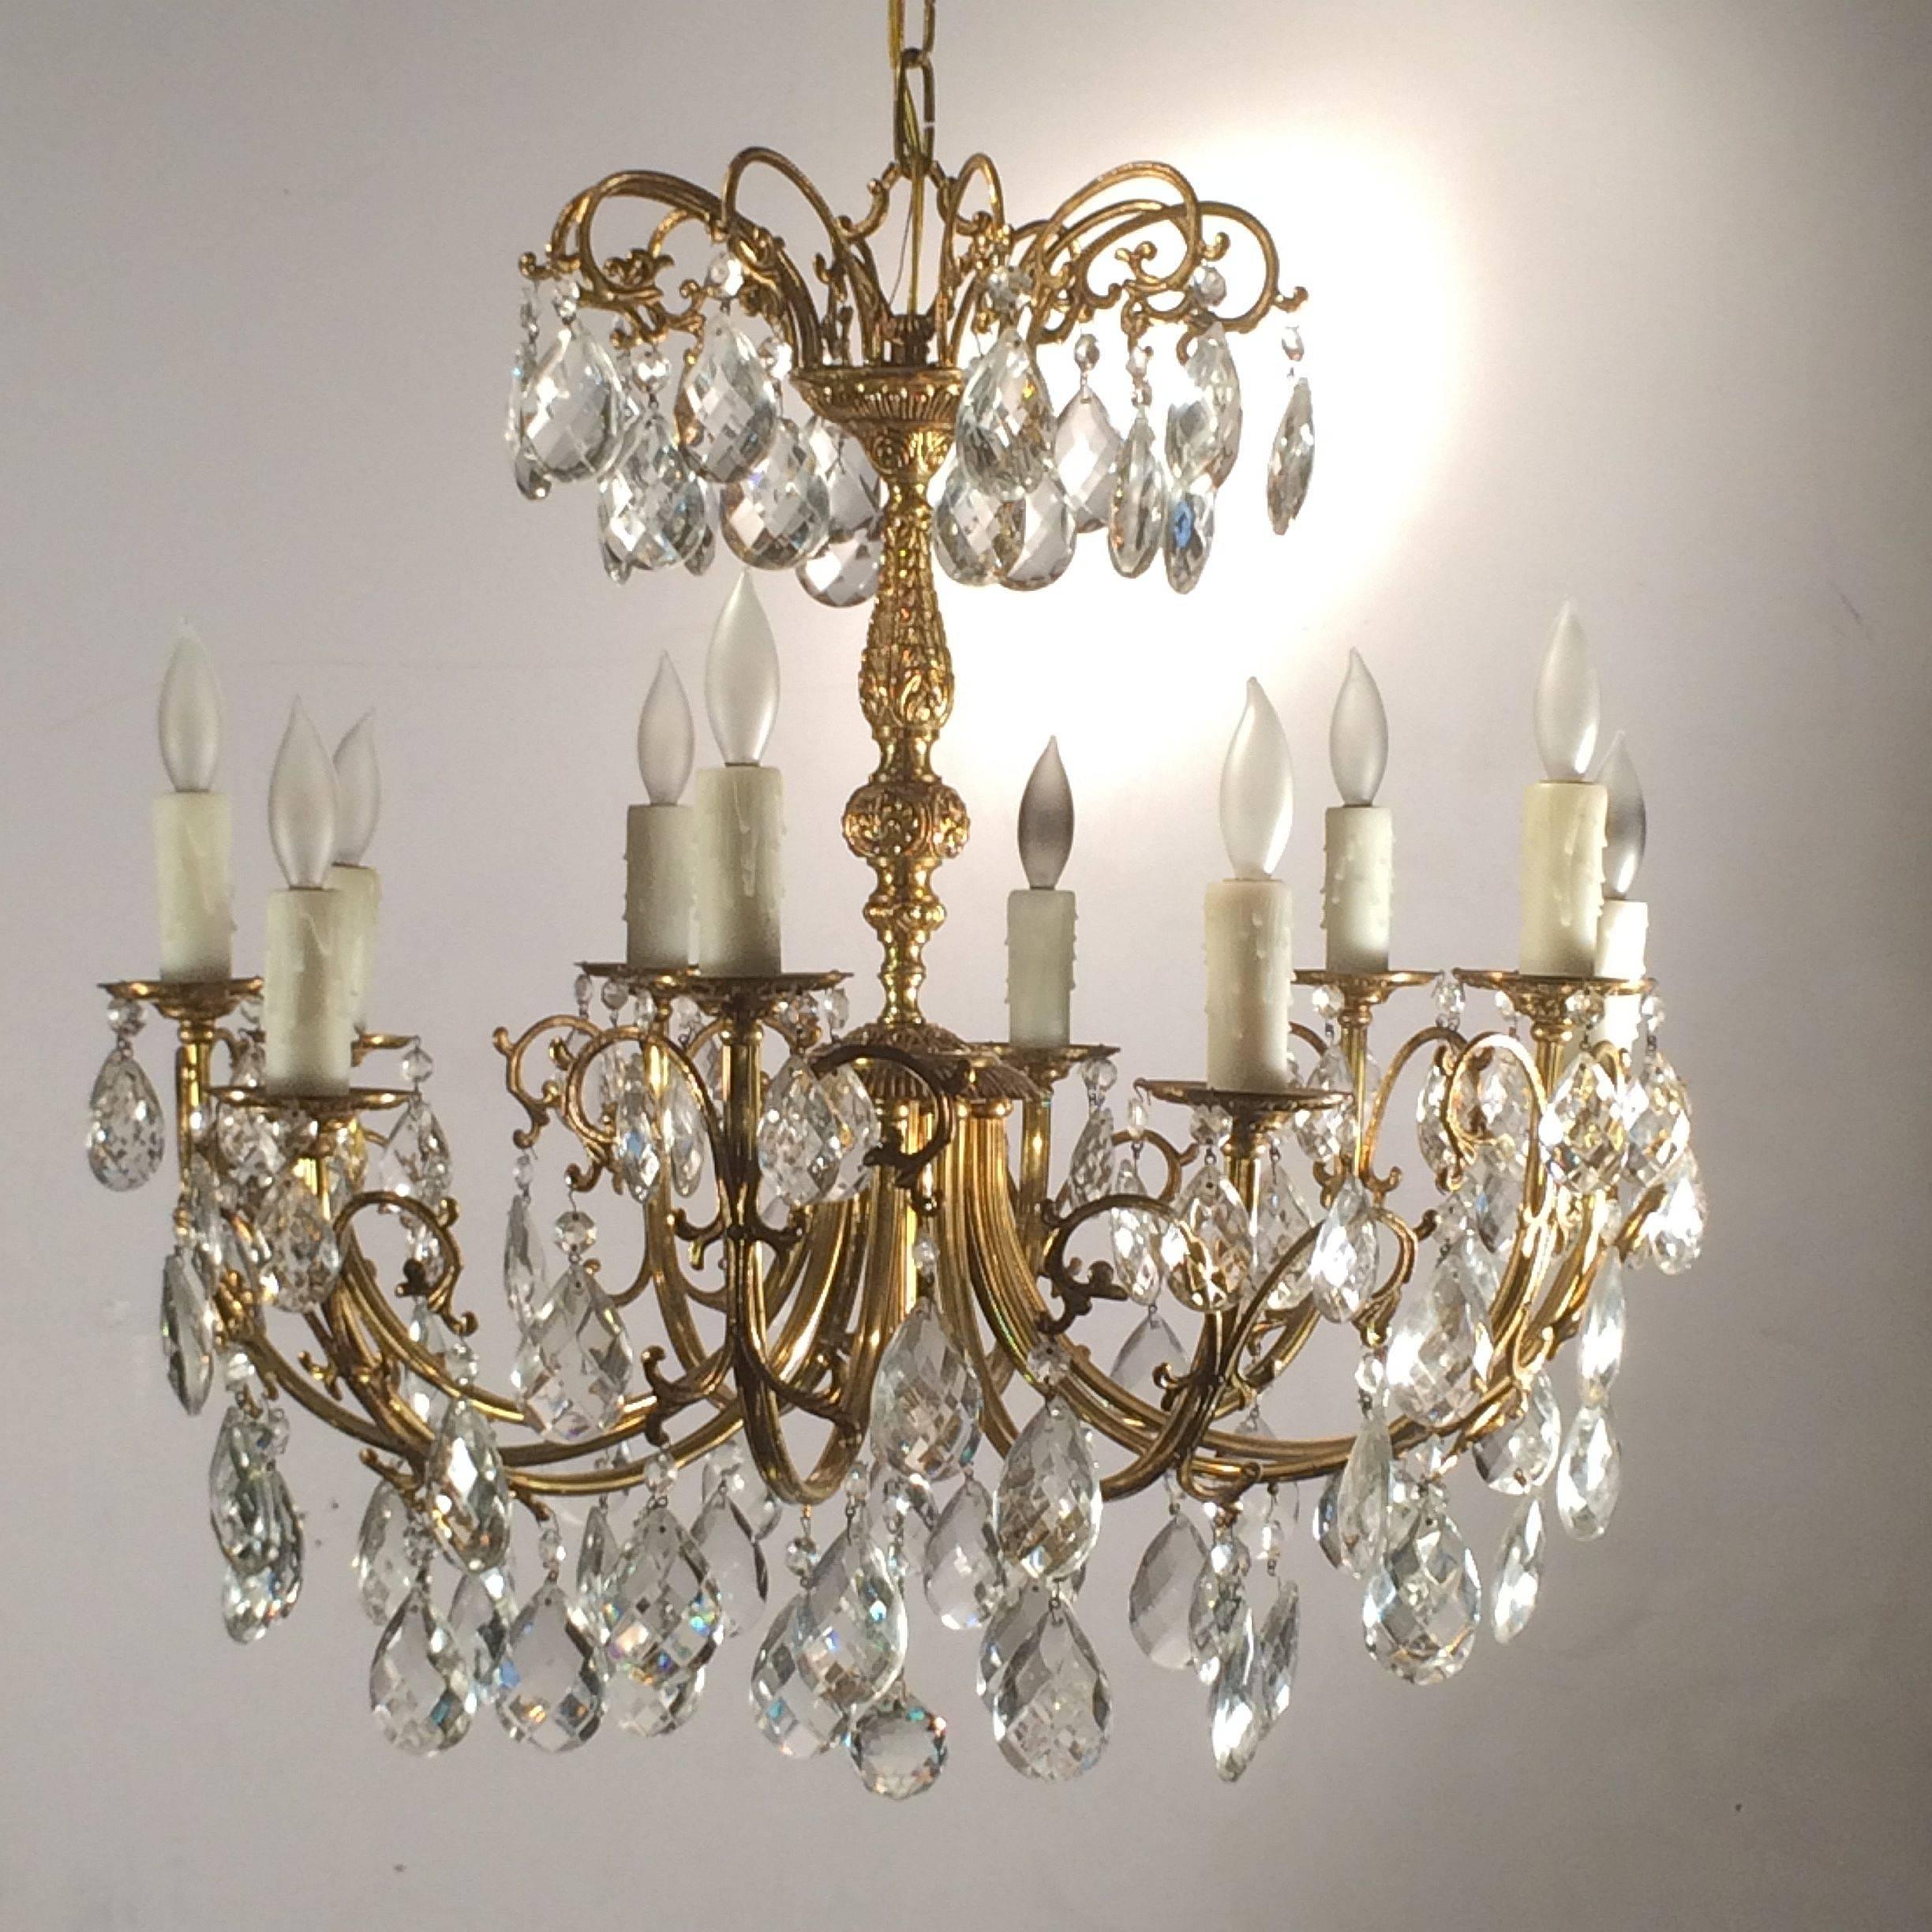 A fine Continental gilt metal and crystal drop ten-light chandelier or hanging fixture, featuring a Rococo body issuing ten gilt metal serpentine arms, holding faux candle holders terminating in lights, with crystal prism drops